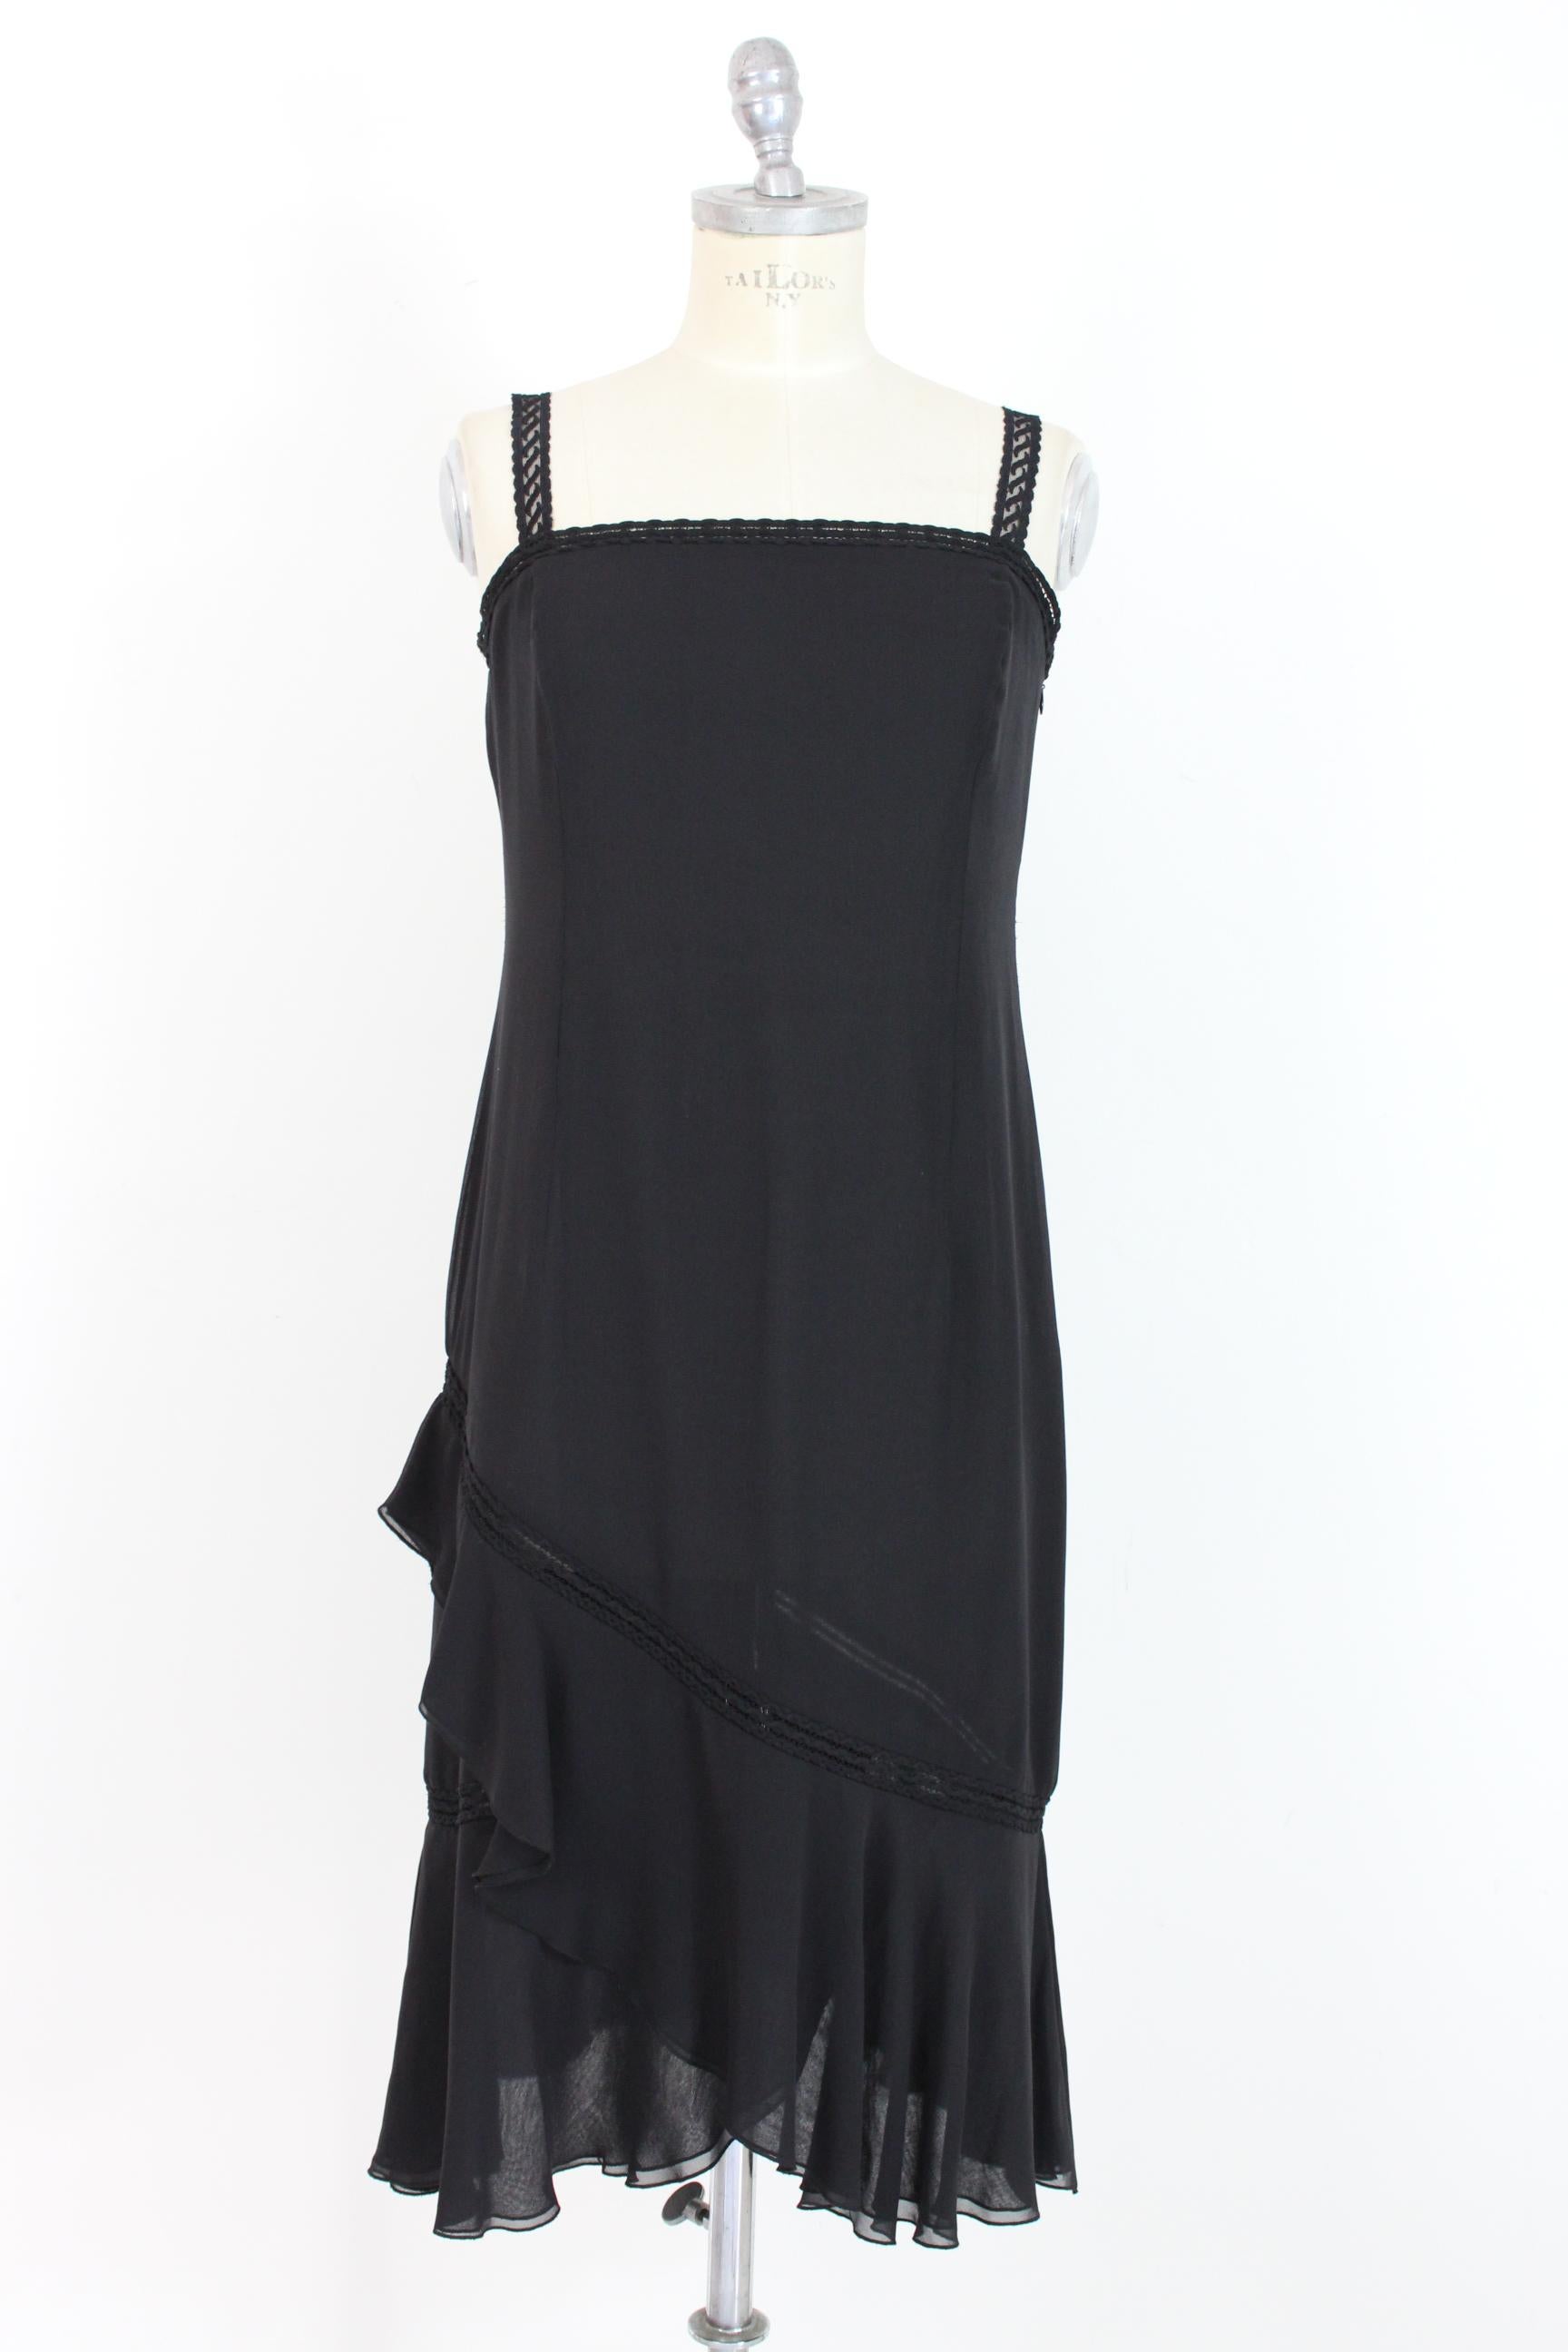 Valentino Roma evening 90s vintage women's dress. Long transparent dress, 100% silk, black color. Embroideries on the bodice and shoulder straps, flounces on the length. Side zip closure. Made in Italy. Excellent vintage conditions.

Size: 44 It 10